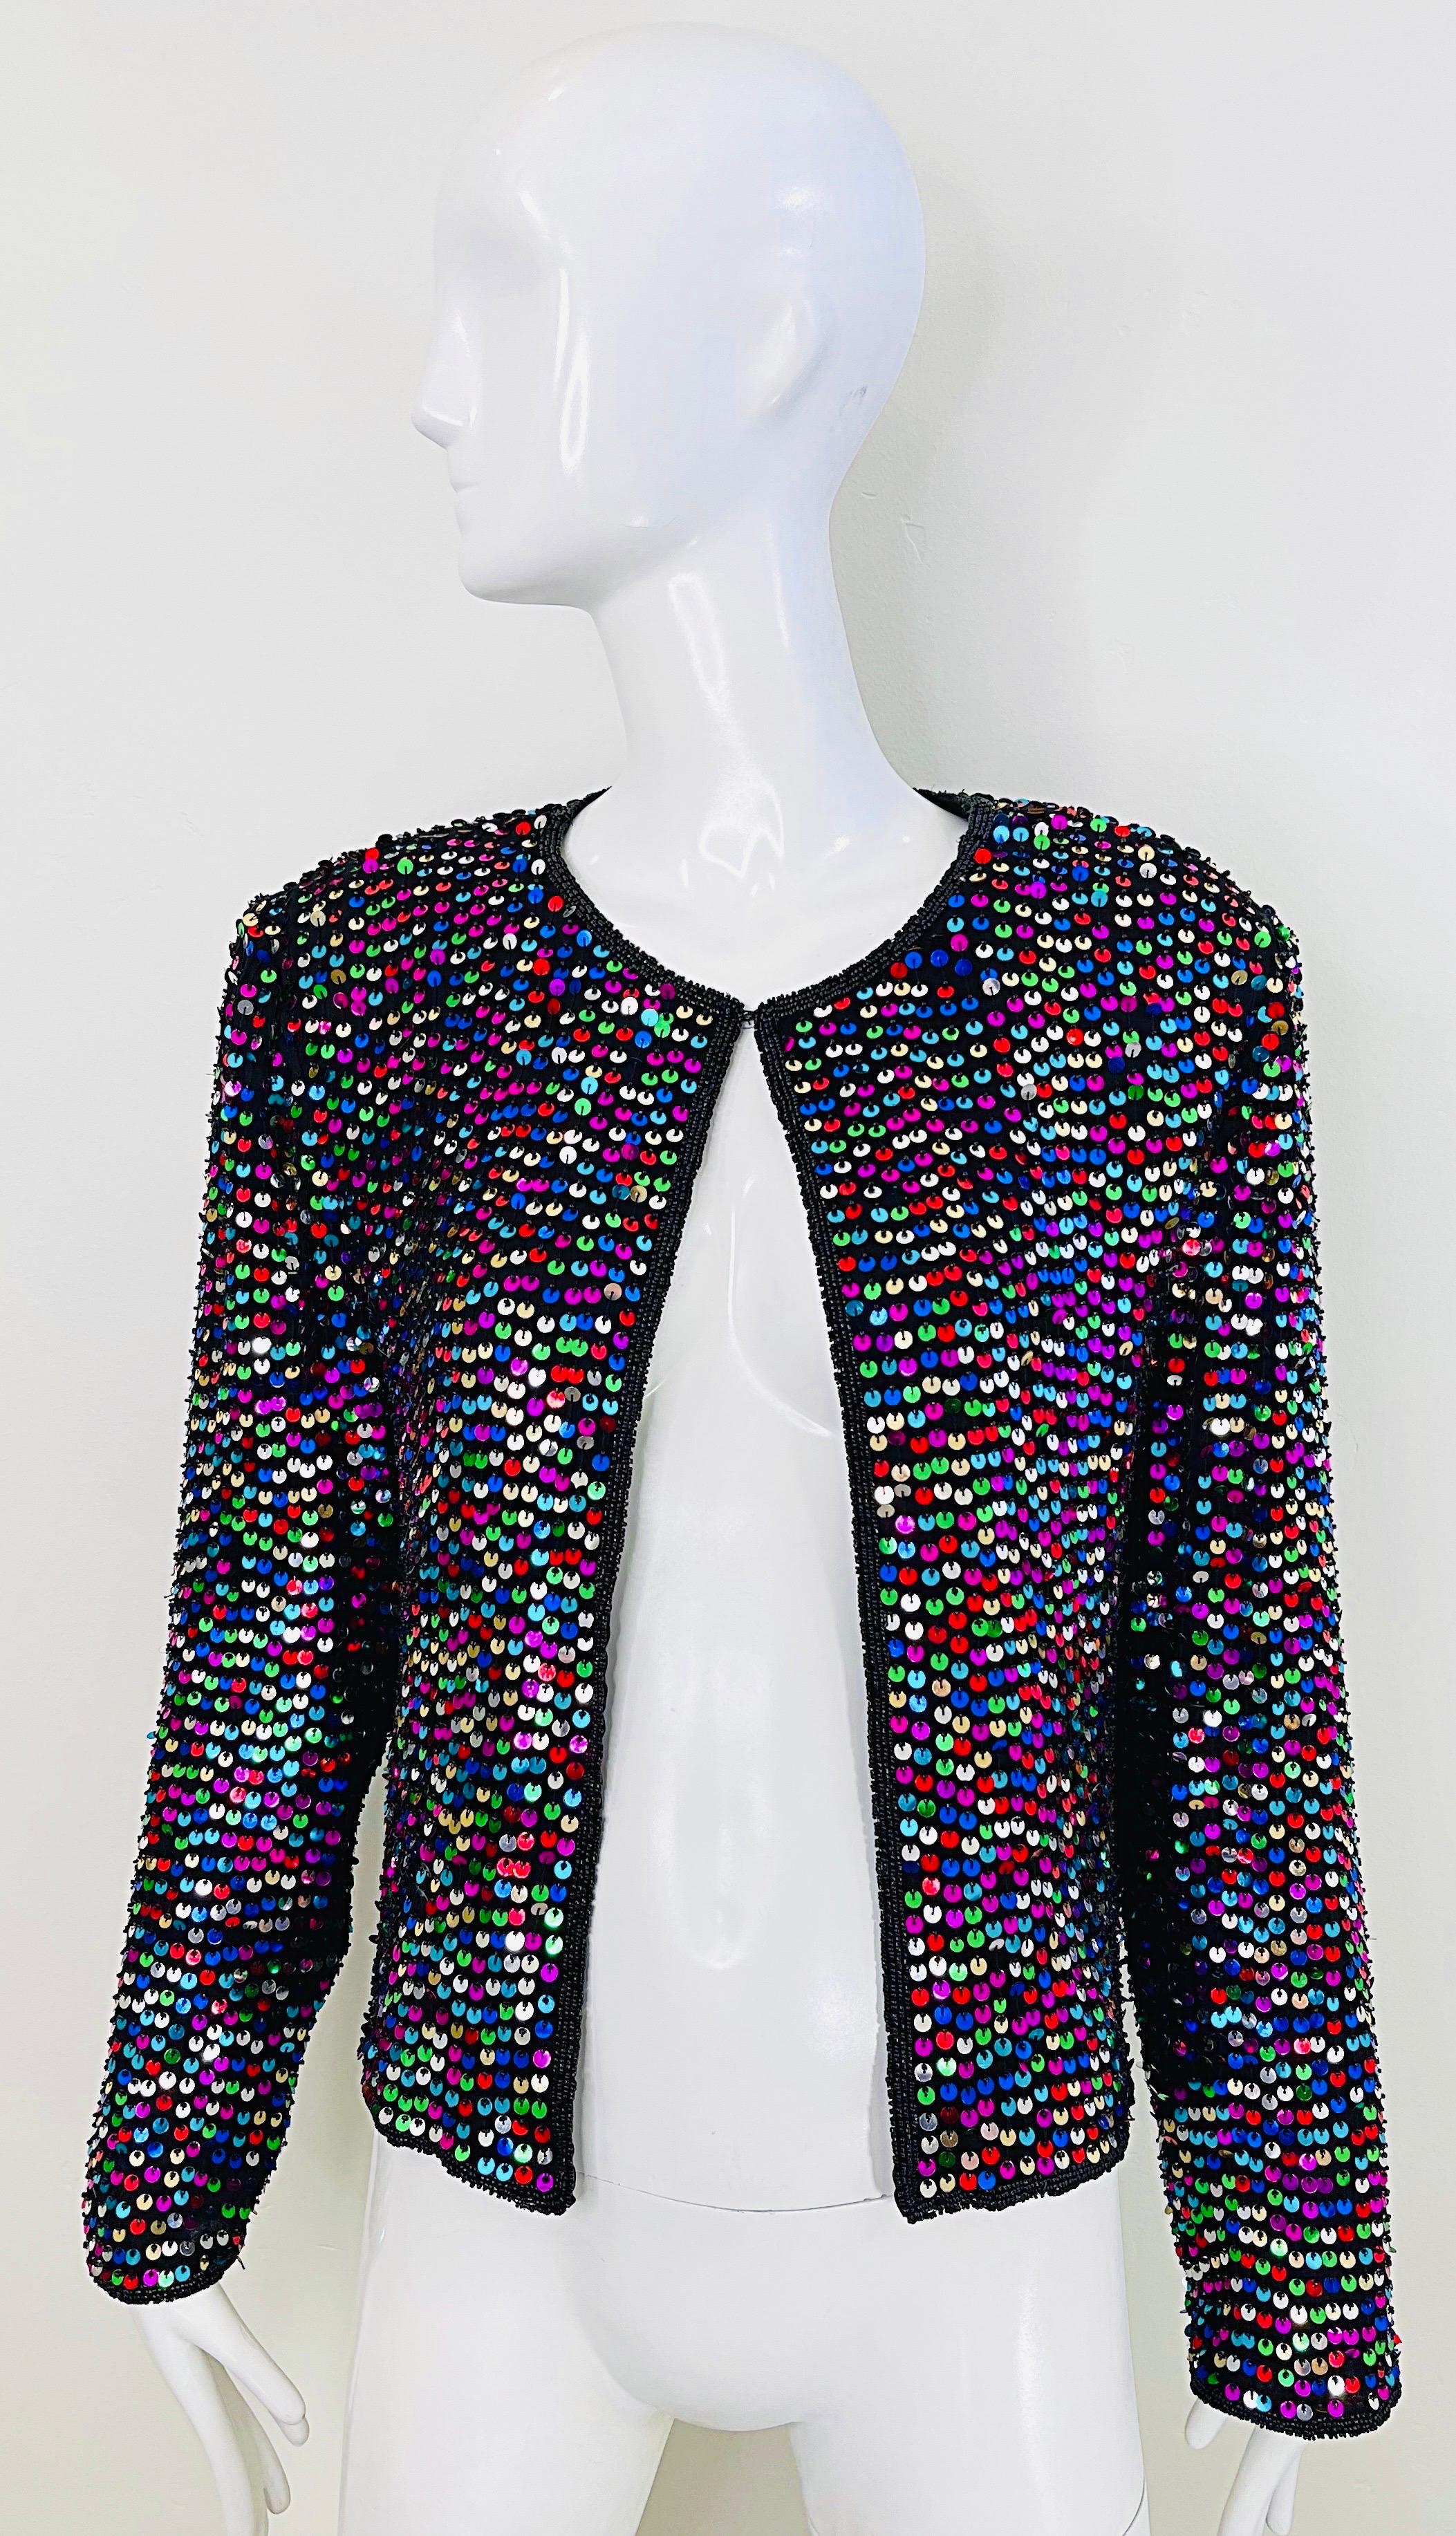 Amazing 1990s fully sequined and beaded colorful silk cardigan ! Features thousands of hand-sewn sequins in purple, green, blue, red, gold and silver throughout. Black seed beads trim the edges. Hook-and-eye closure at top center neck. Fully